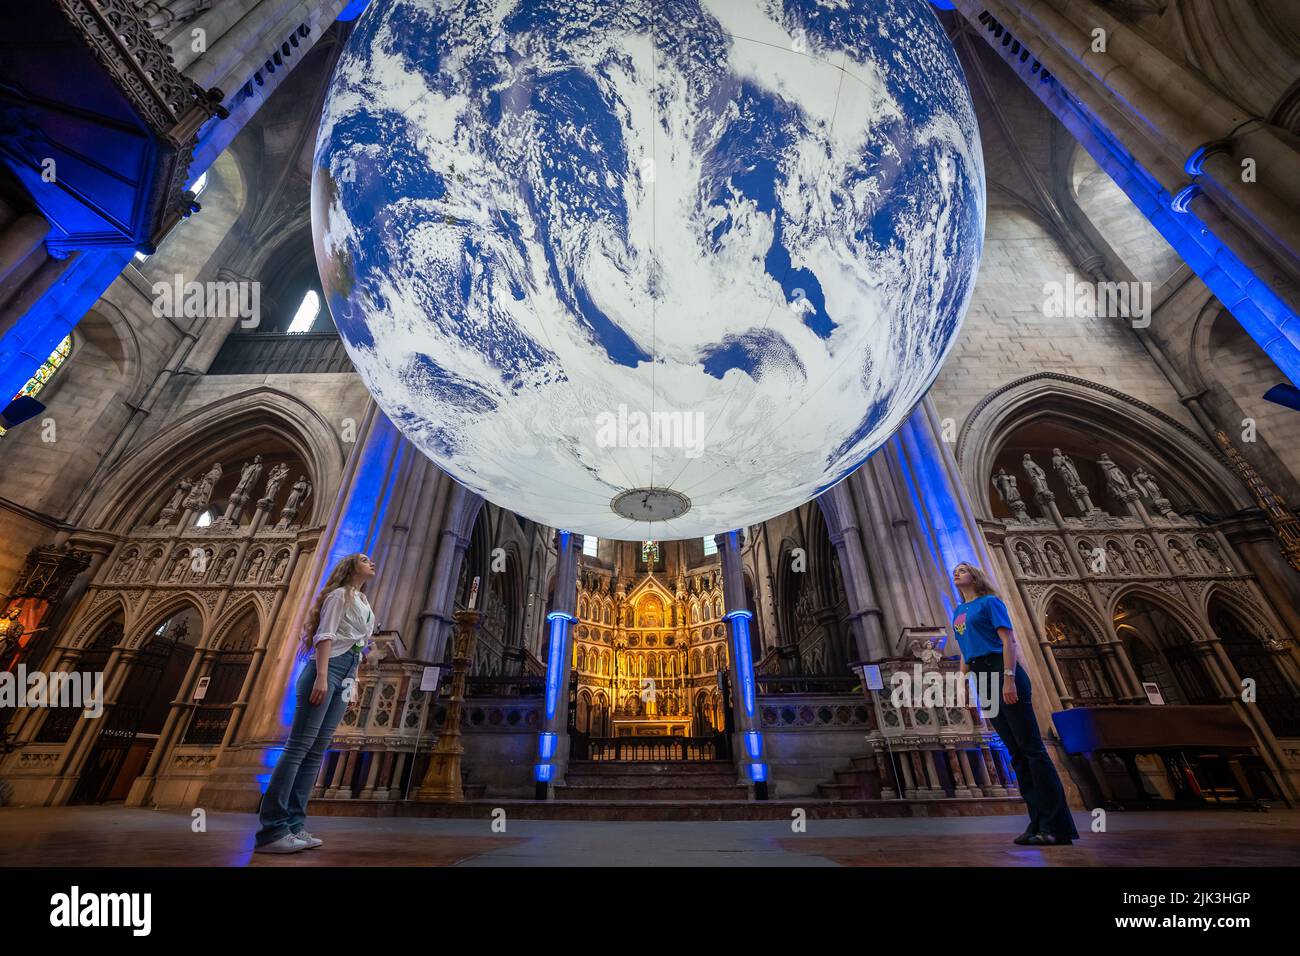 London, UK. 30th July, 2022. Gaia earth installation by Luke Jerram in St John the Baptist Church, Shepherd's Bush. The monumental internally-lit sculpture returns to the city as part of Kensington + Chelsea Festival. UK artist Jerram aims to instil a sense of ‘overview effect’ that astronauts experience when looking down at earth from space. Credit: Guy Corbishley/Alamy Live News Stock Photo